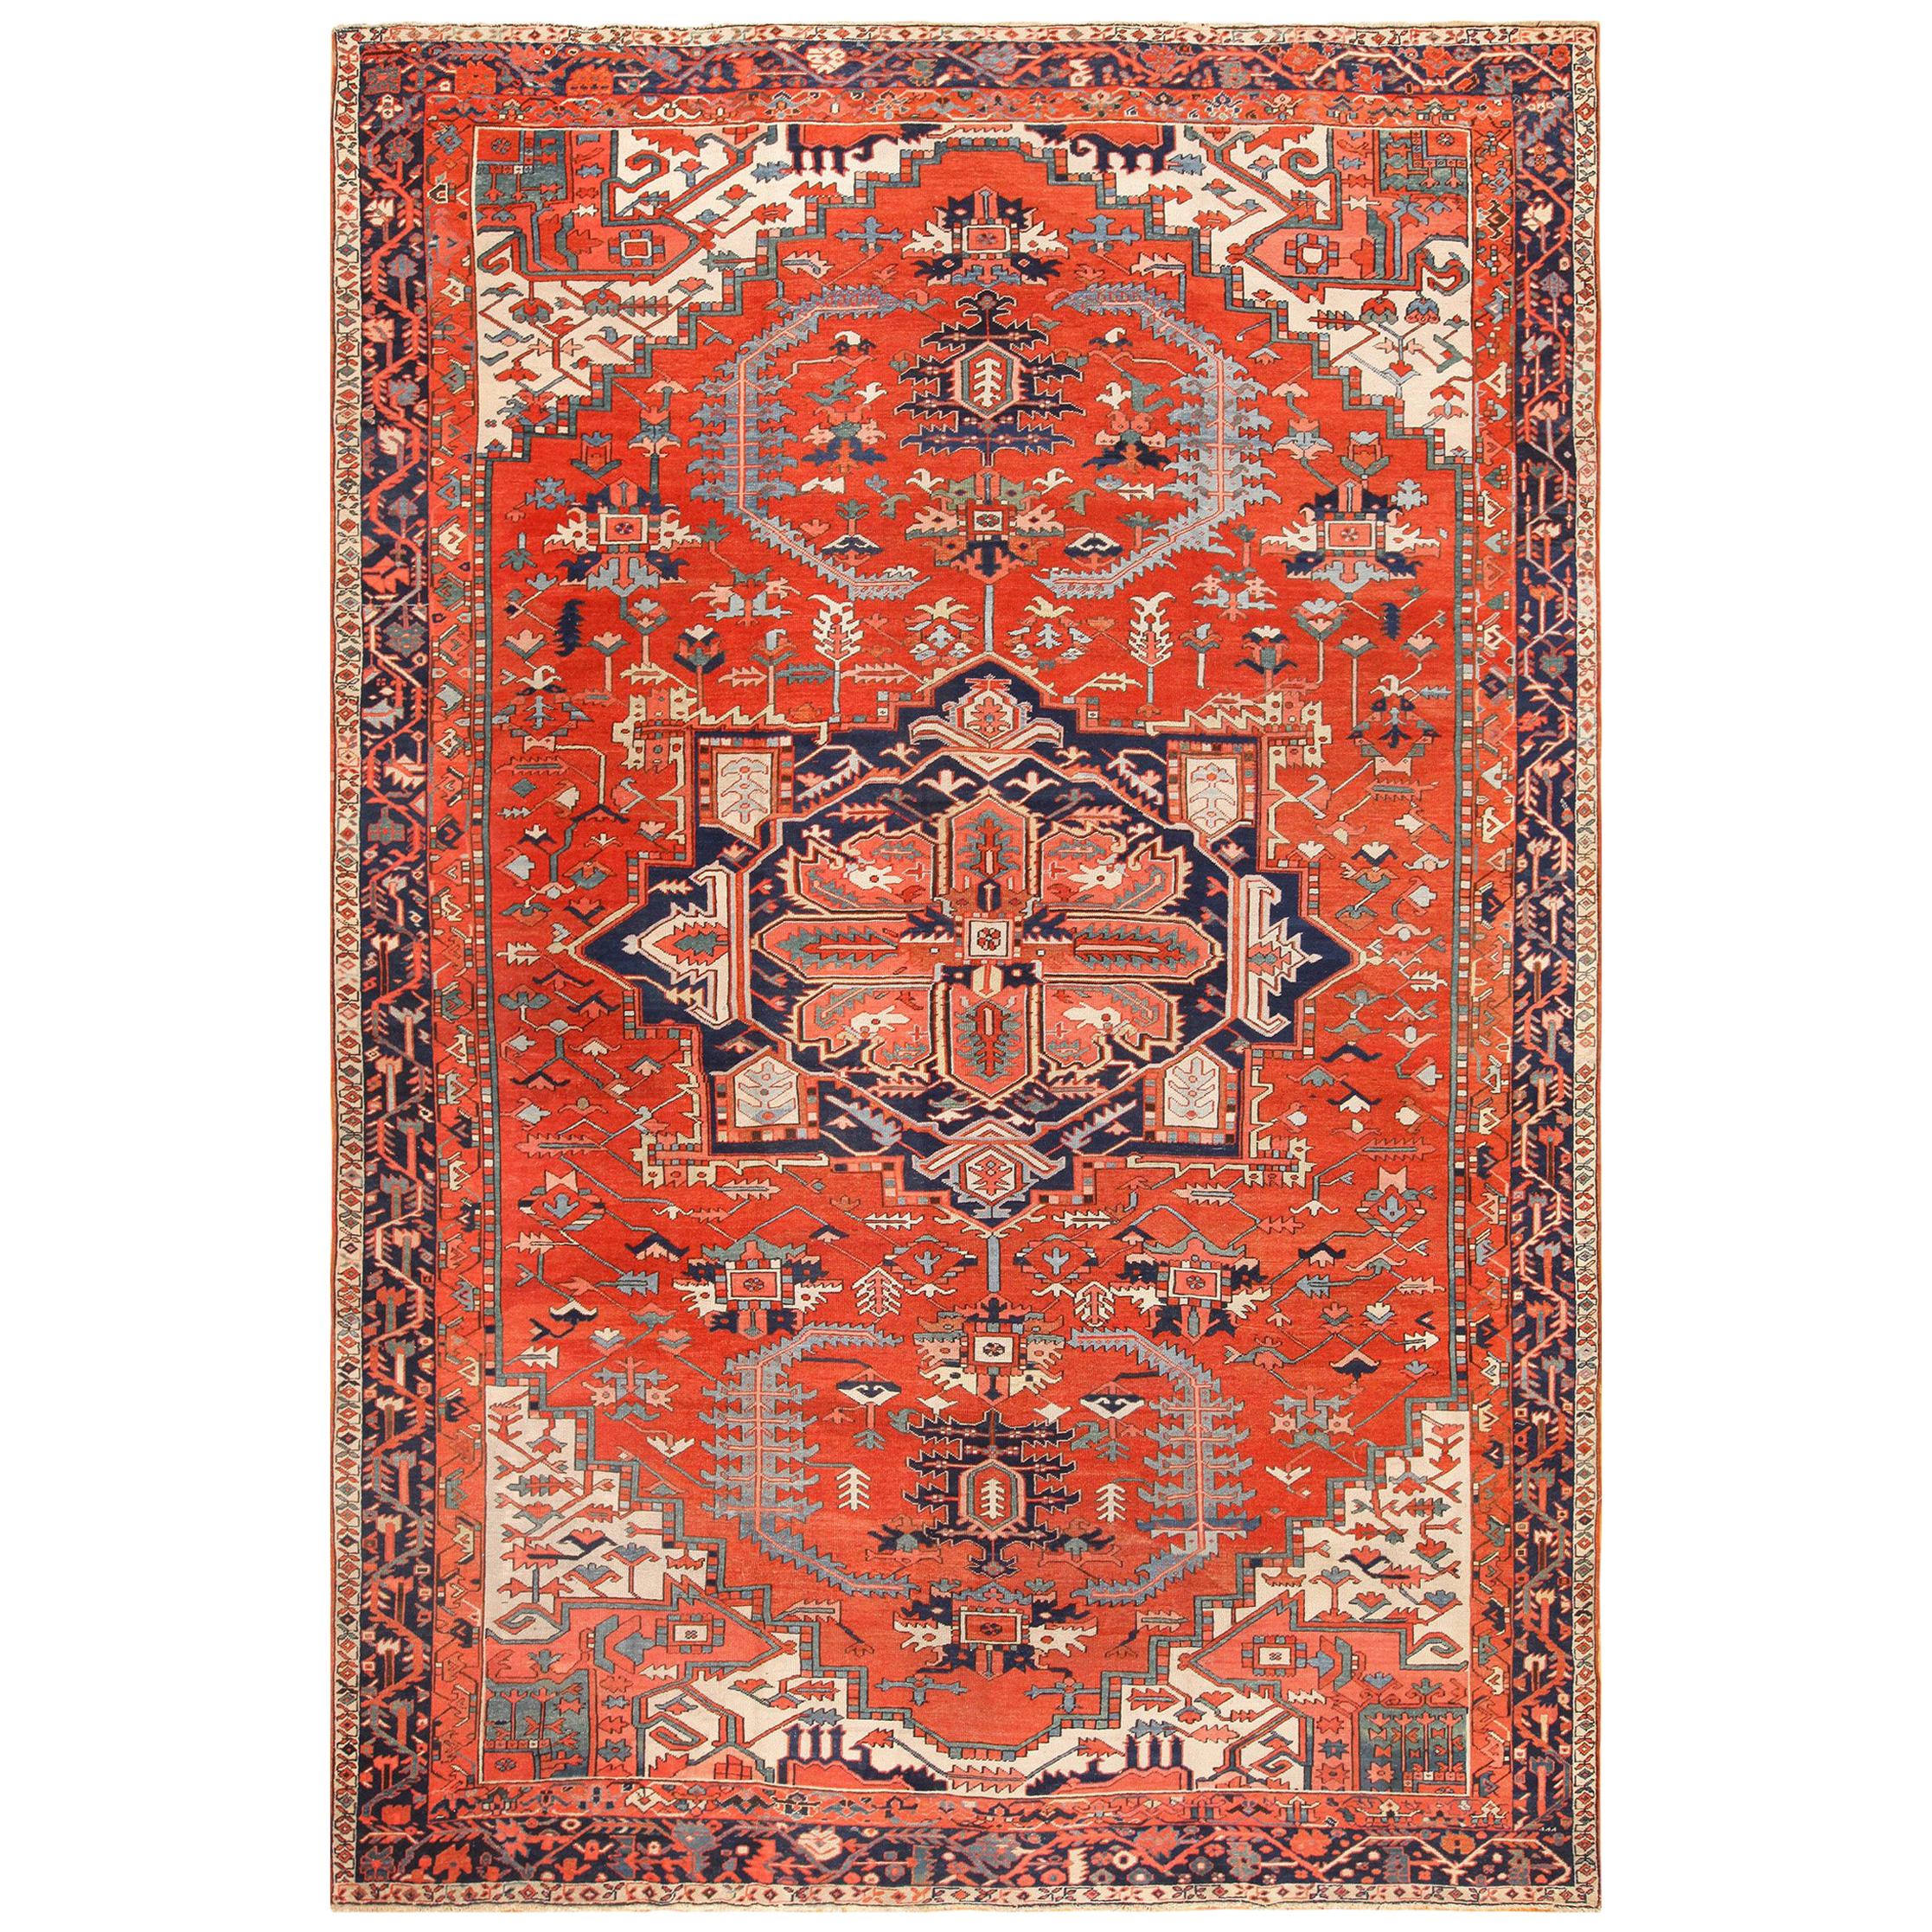 Antique Serapi Persian Rug. Size:  11 ft x 16 ft 3 in 